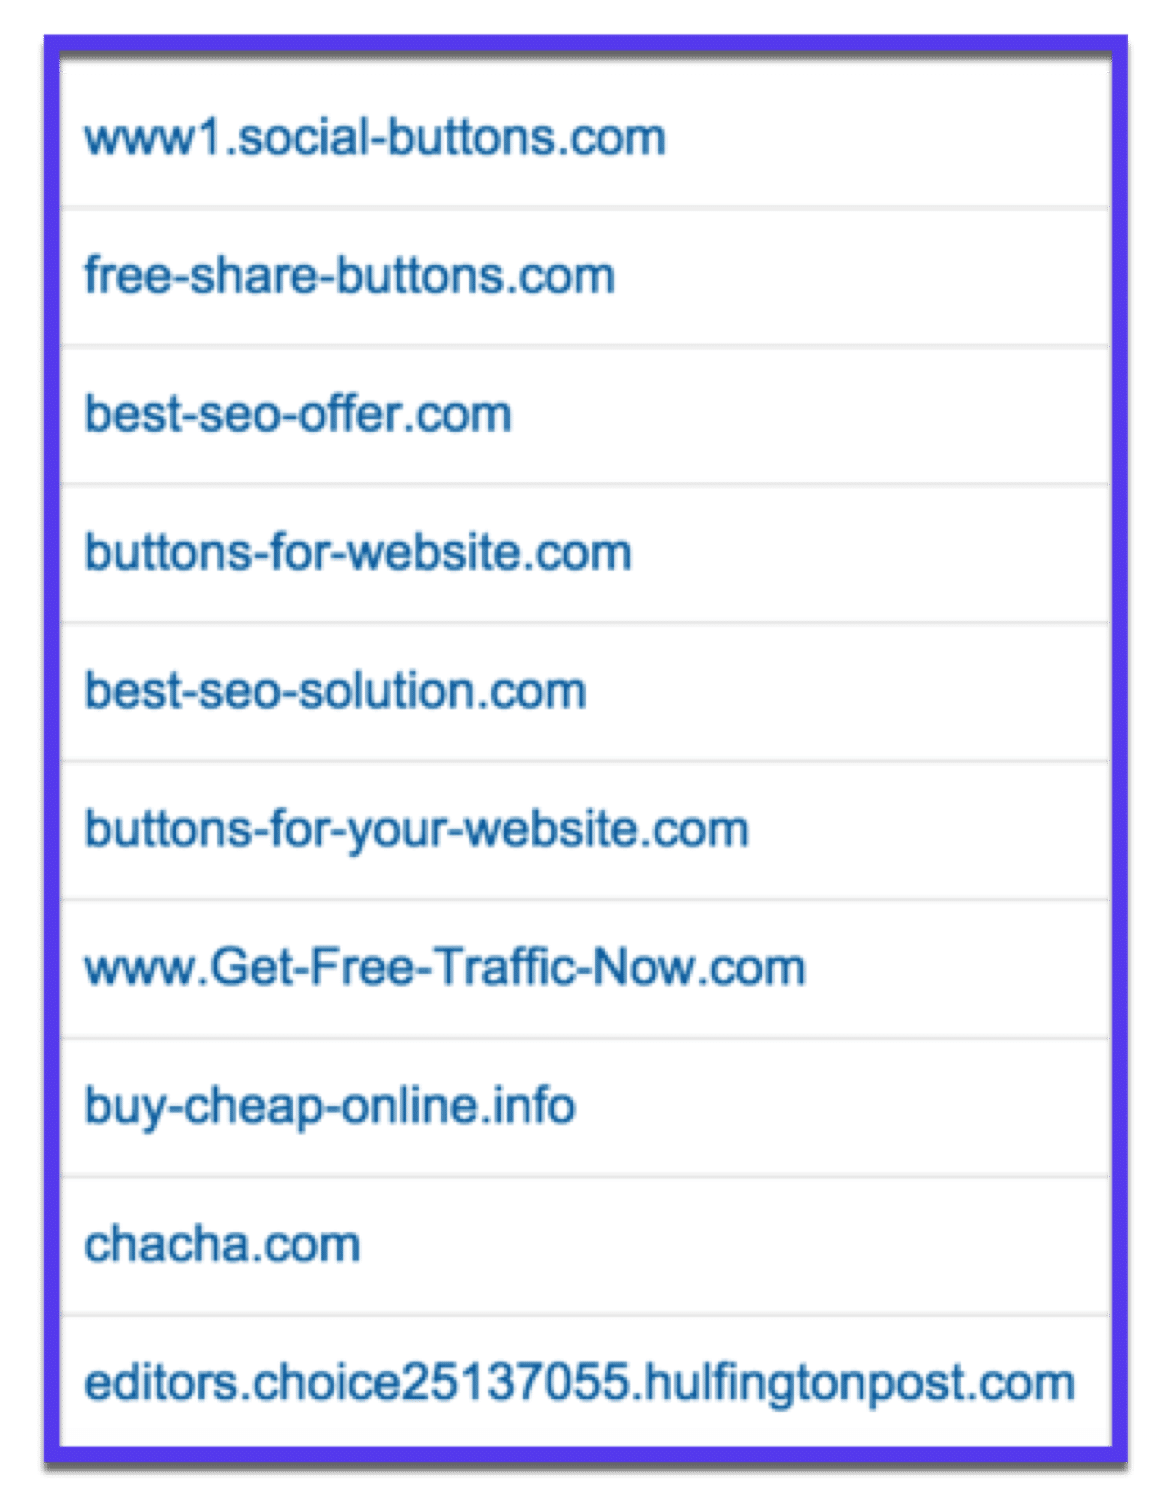 Even more spam sites in Google Analytics